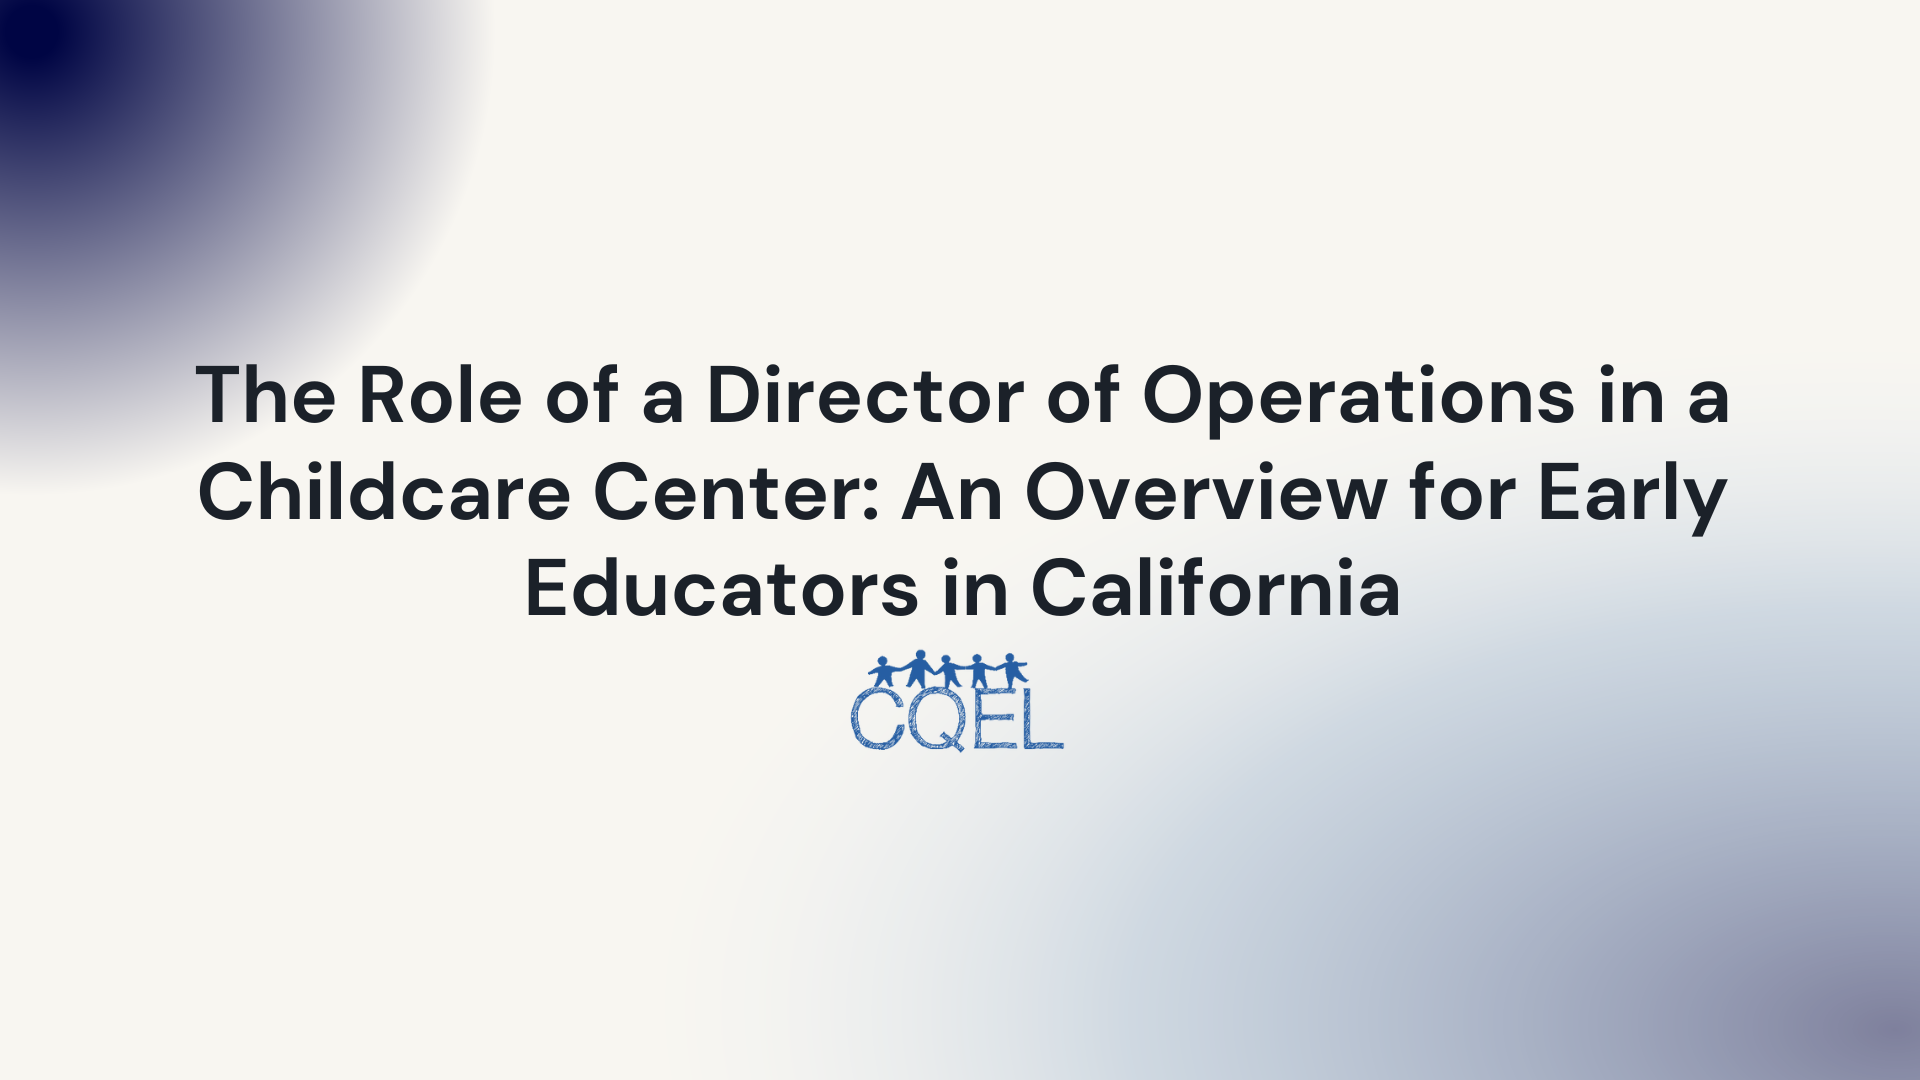 The Role of a Director of Operations in a Childcare Center: An Overview for Early Educators in California